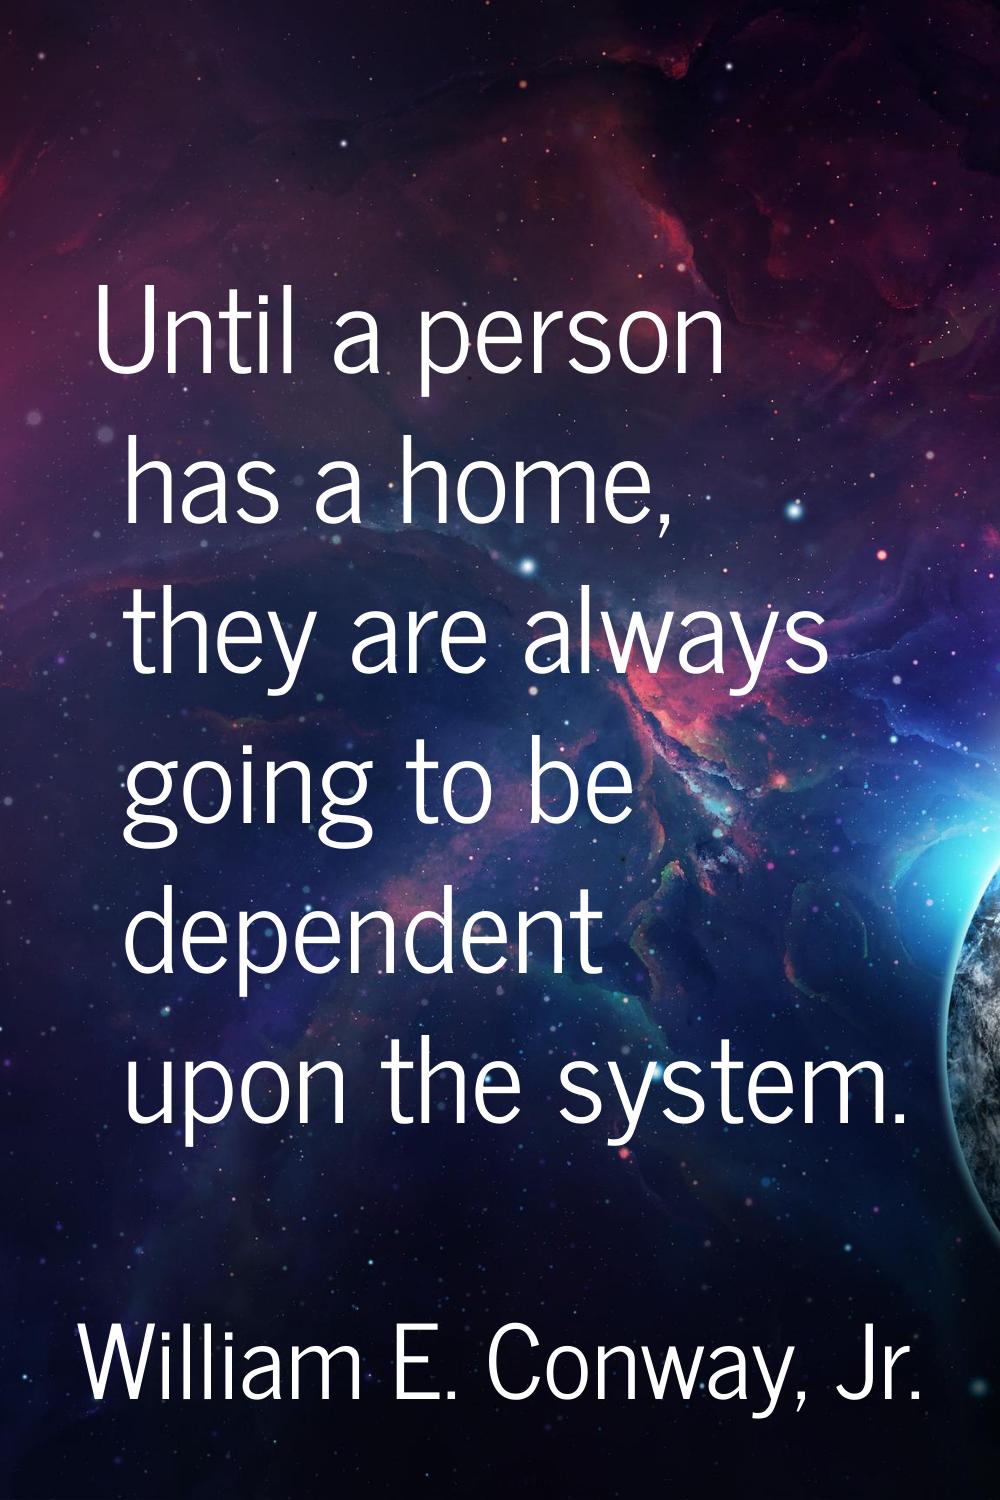 Until a person has a home, they are always going to be dependent upon the system.